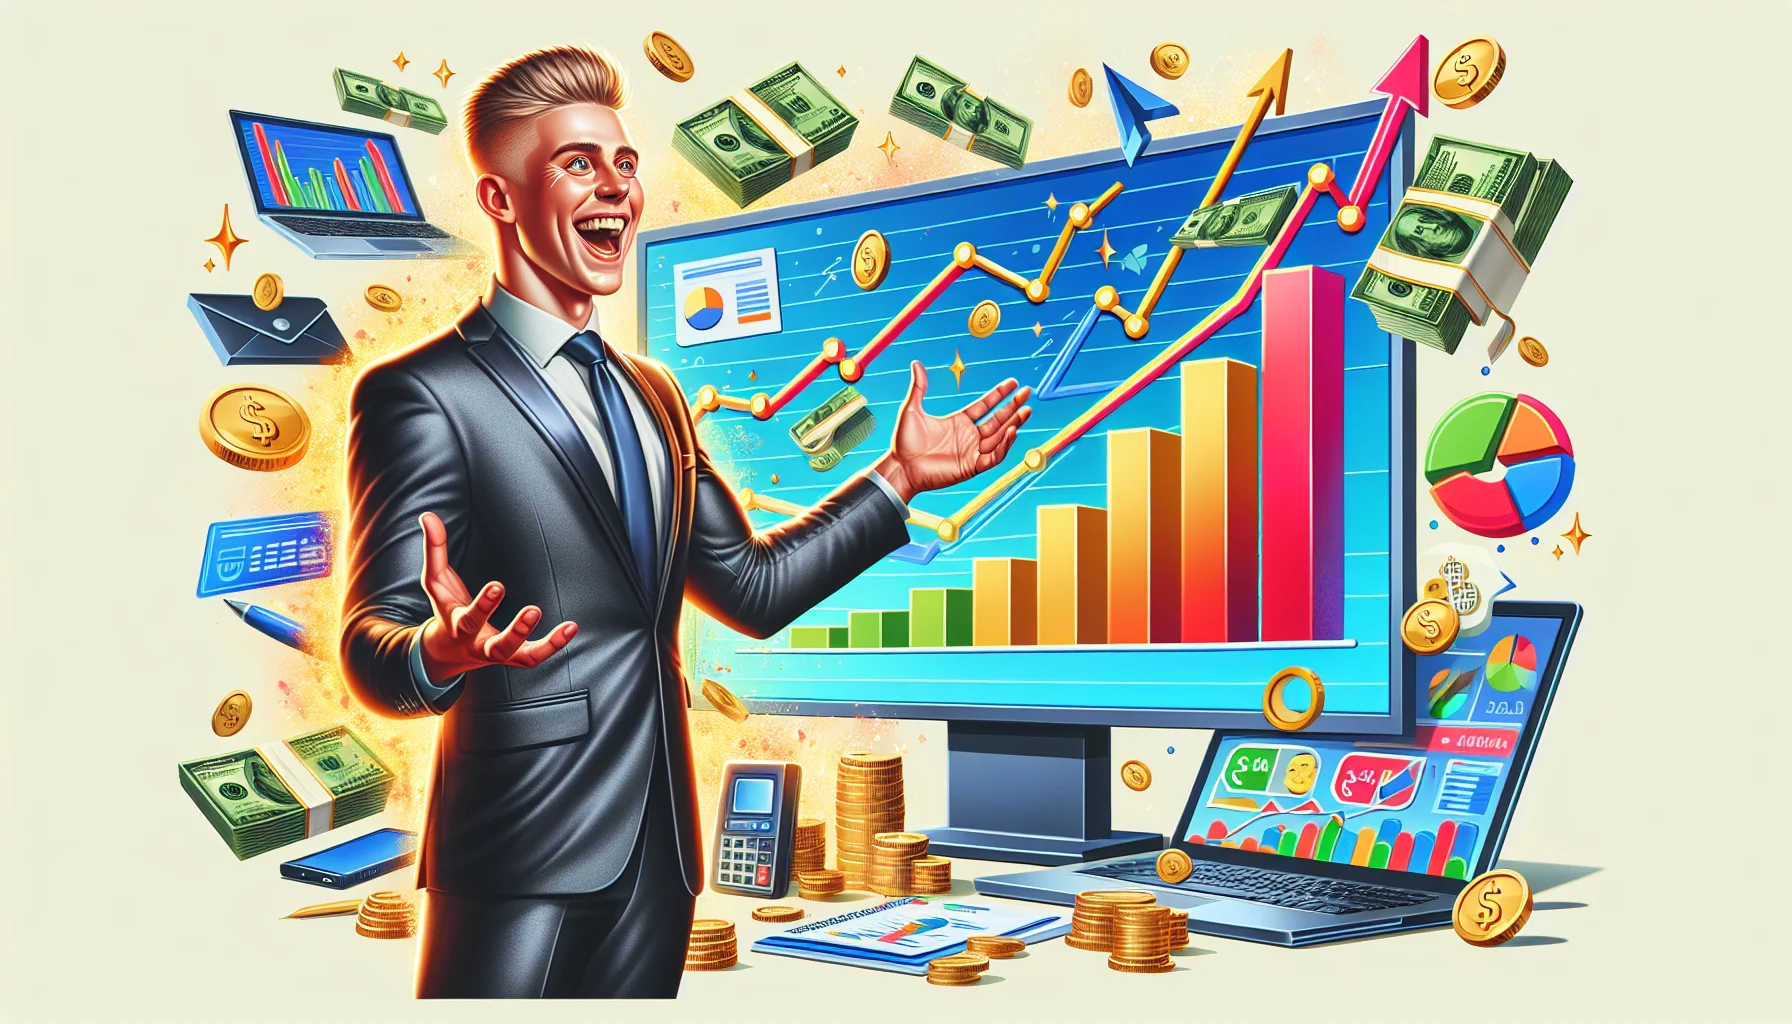 Create a humor-filled realistic image showcasing an individual involved in affiliate marketing in an enticing scenario related to making money online. This individual is male of Scandinavian descent, with short blonde hair, and dressed in modern professional attire. He is joyfully presenting a large, colorful bar chart representing increasing profits on a presentation screen, with icons of computers, internet connectivity, and bank notes around him to symbolize the online business. The aesthetic should be vibrant and dynamic, emphasizing the lucrative nature of digital entrepreneurship.